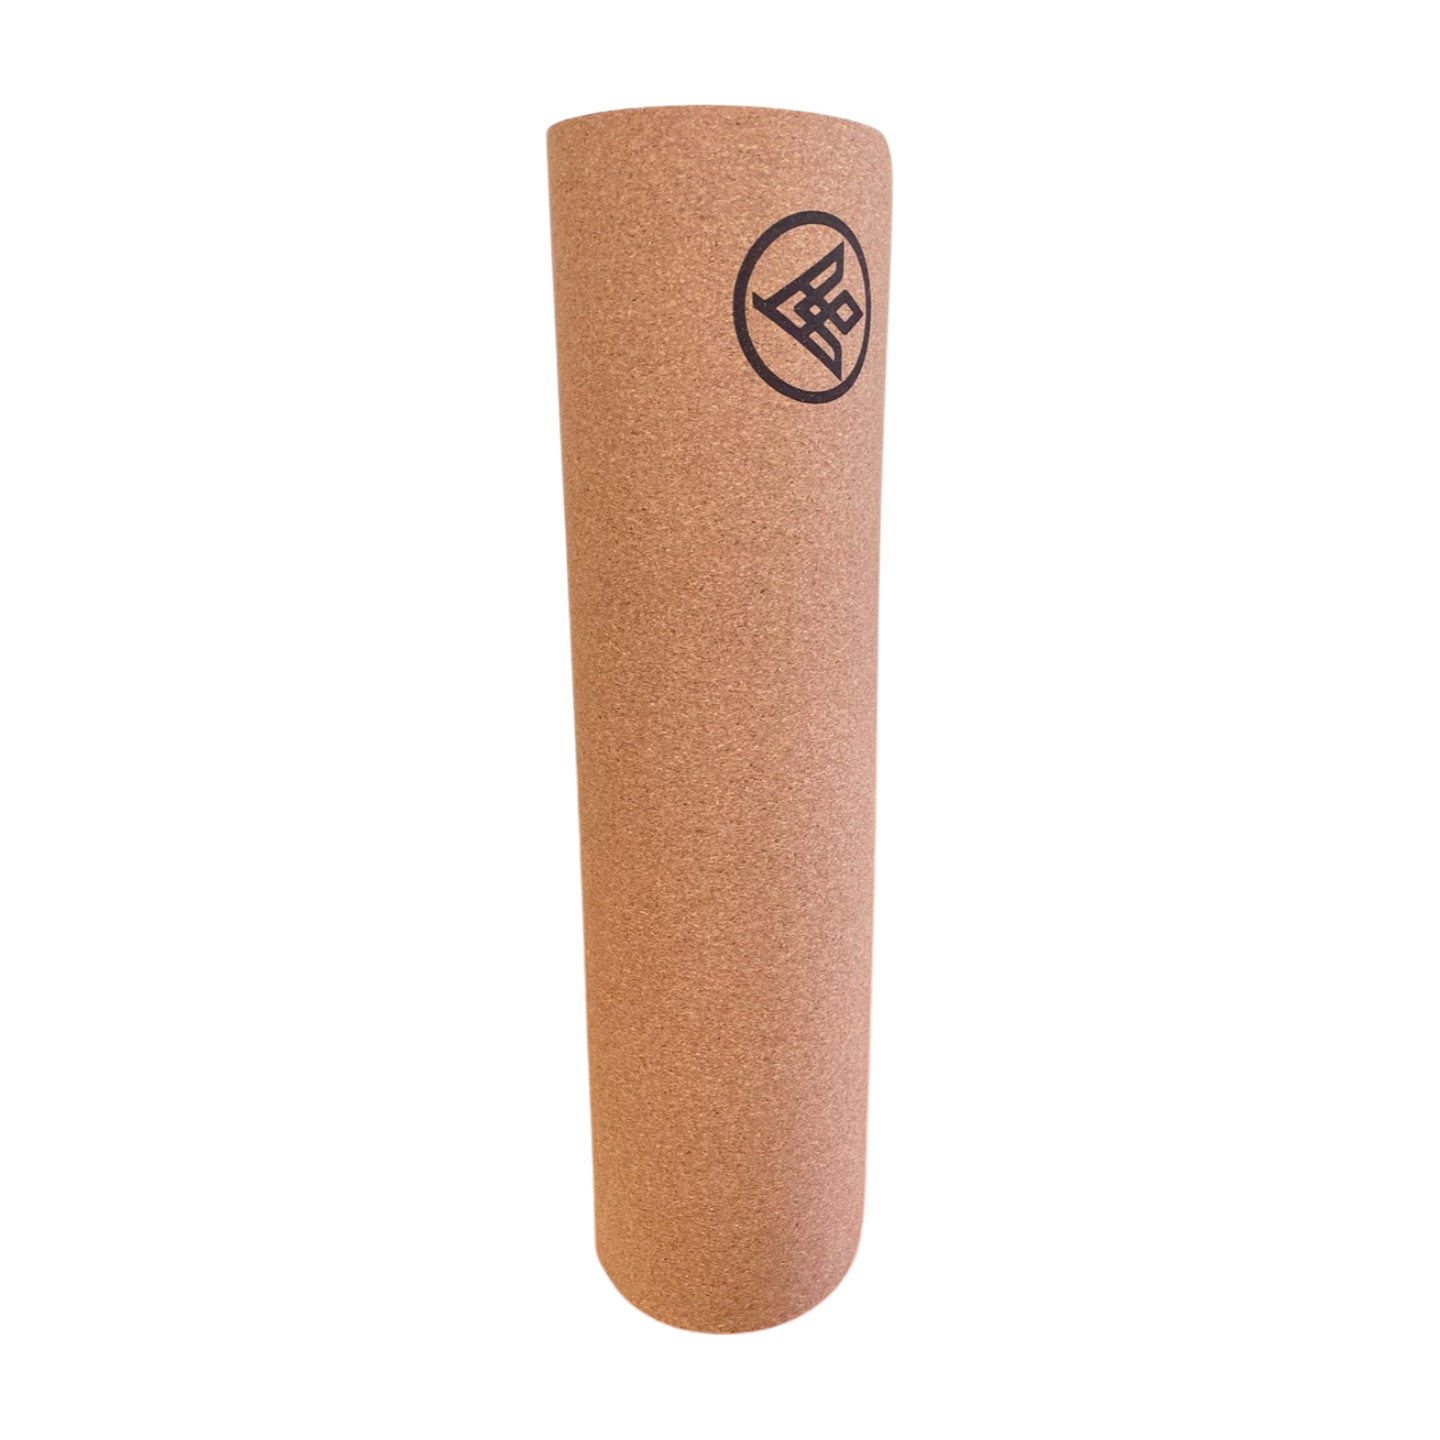 The Flux cork yoga mat upright ready to go to your next yoga class